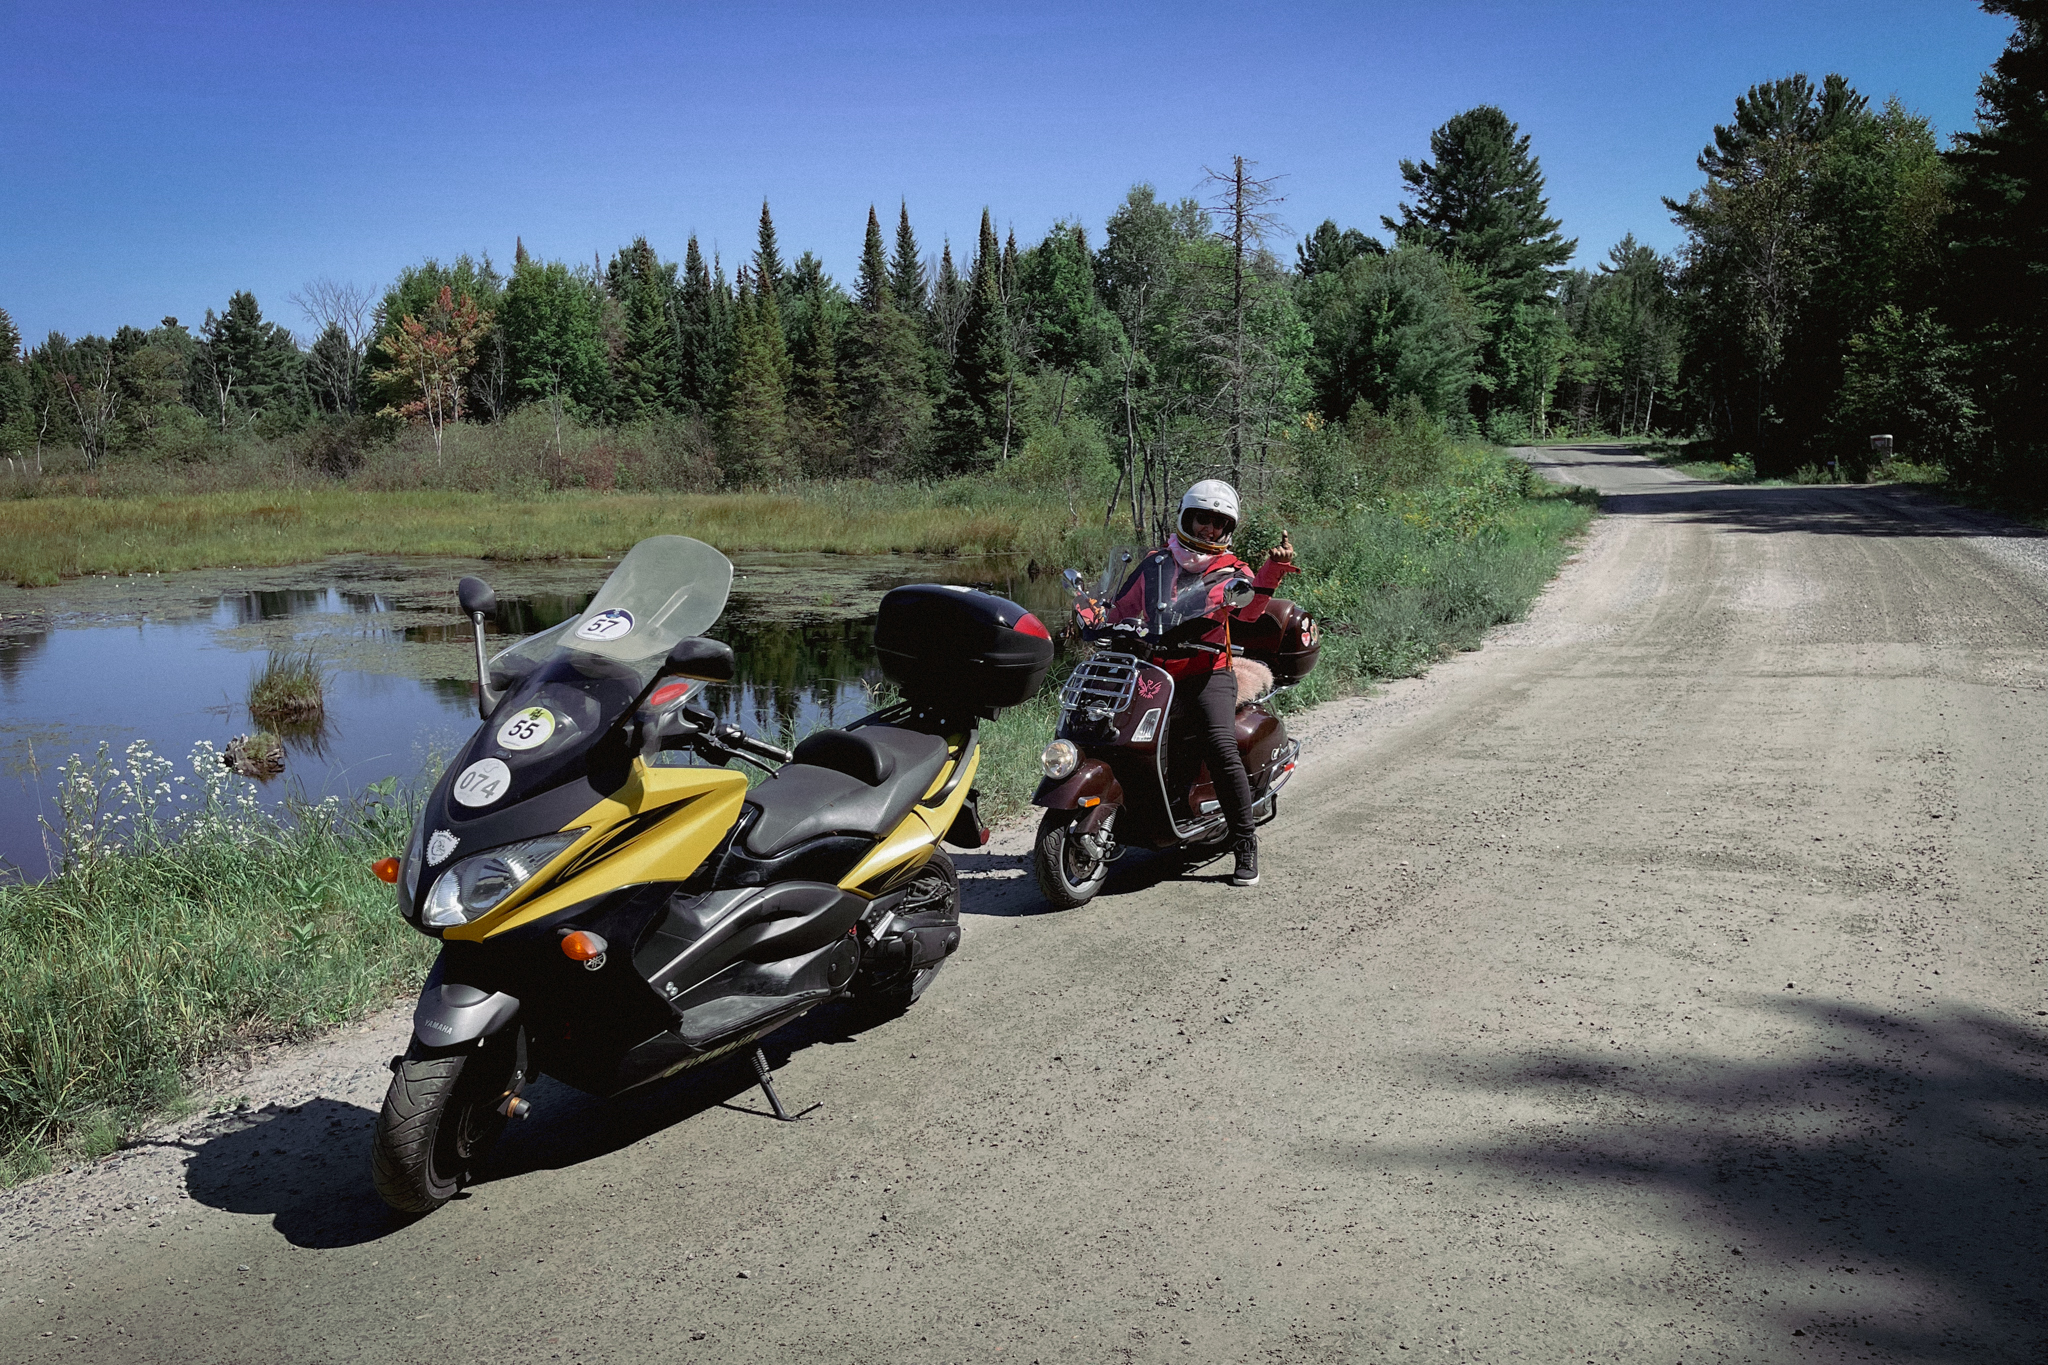 two motorcycles, one with a rider, parked along the side of a road next to a pond surrounded in green grass and forest, under a bright blue sky.